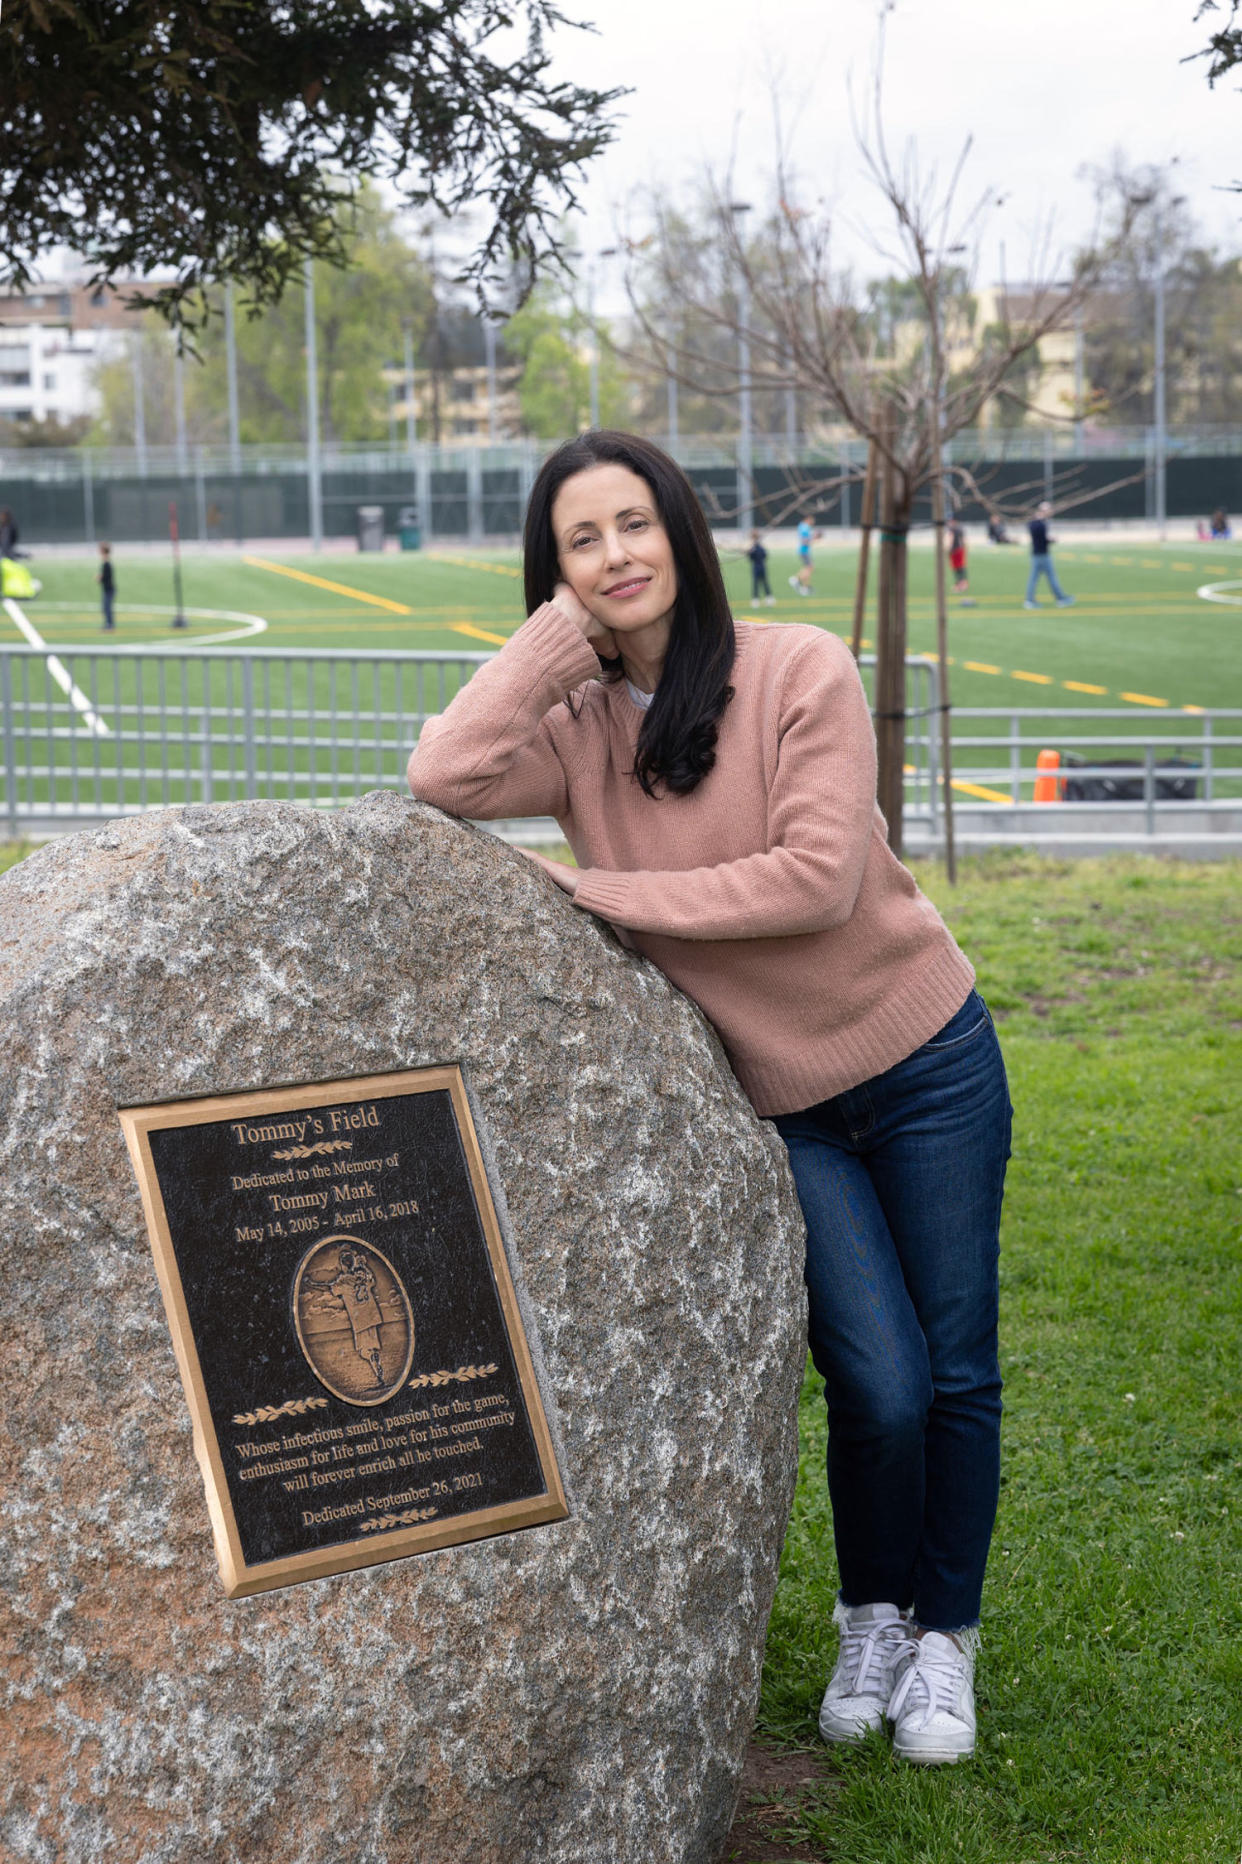 Nikki Mark posing with plaque for her son, Tommy. (Courtesy Christine Bjerke)